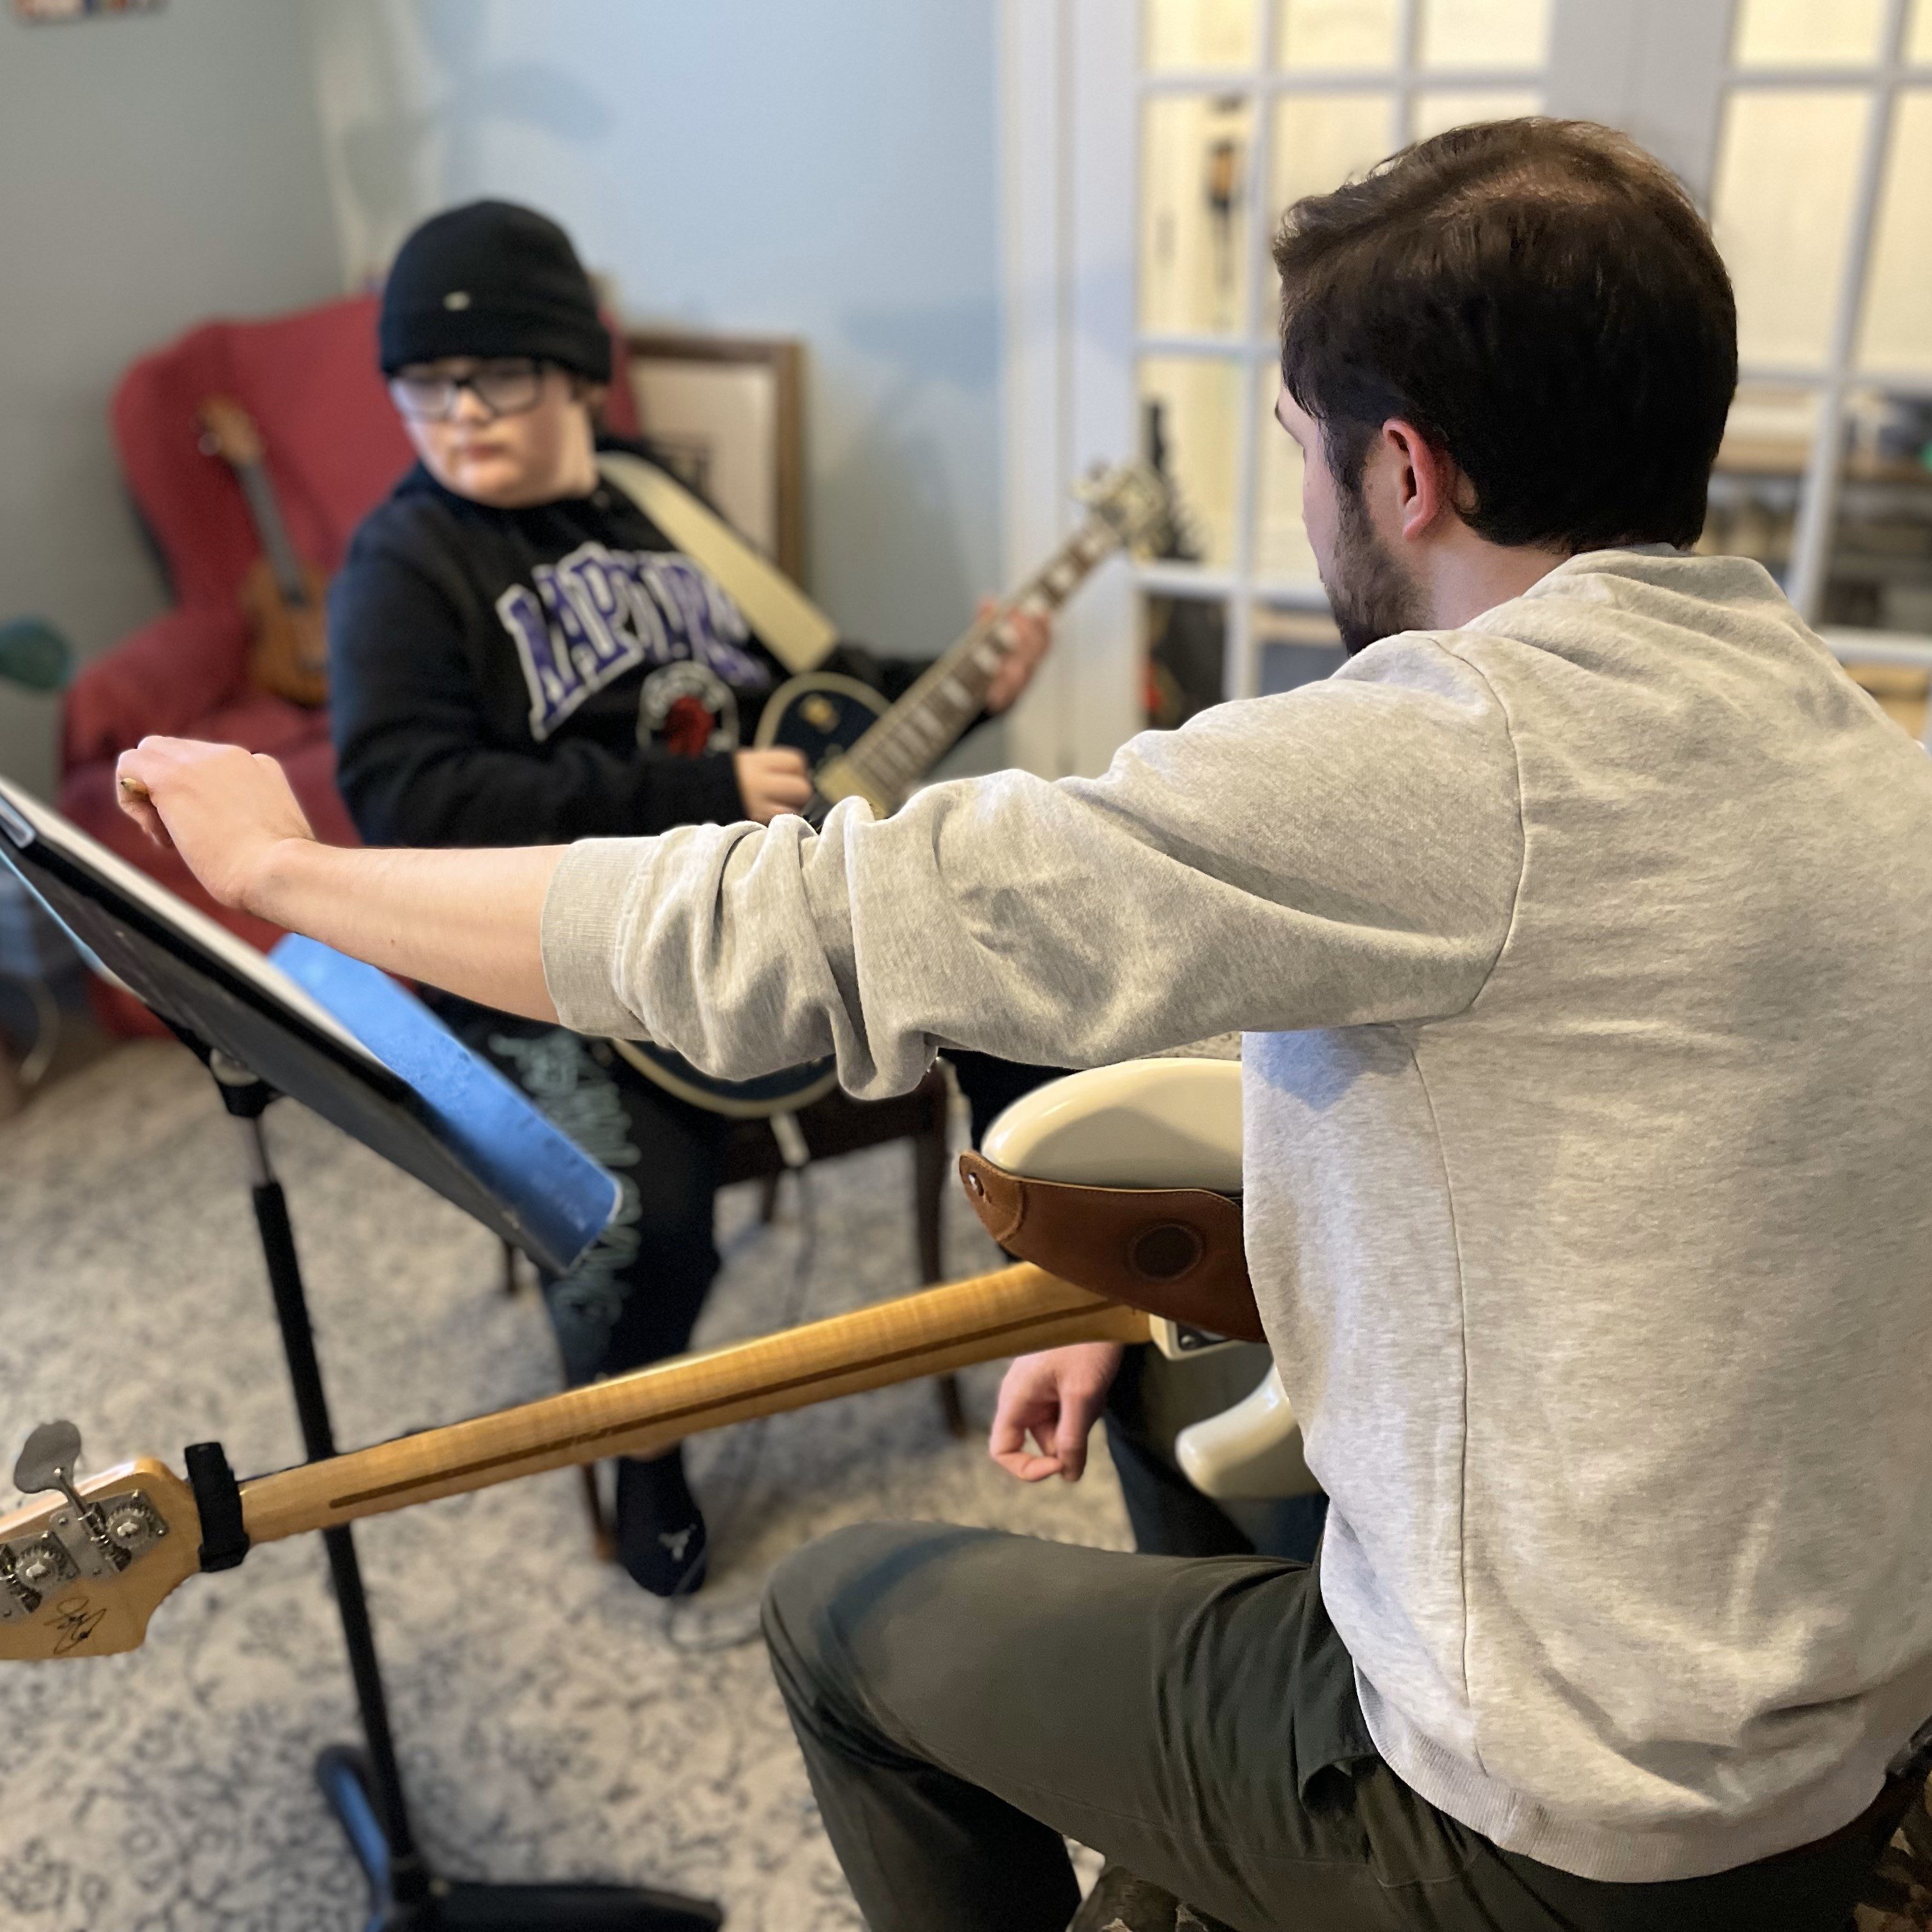 Graeme Morrison teaching guitar lessons to a young student.